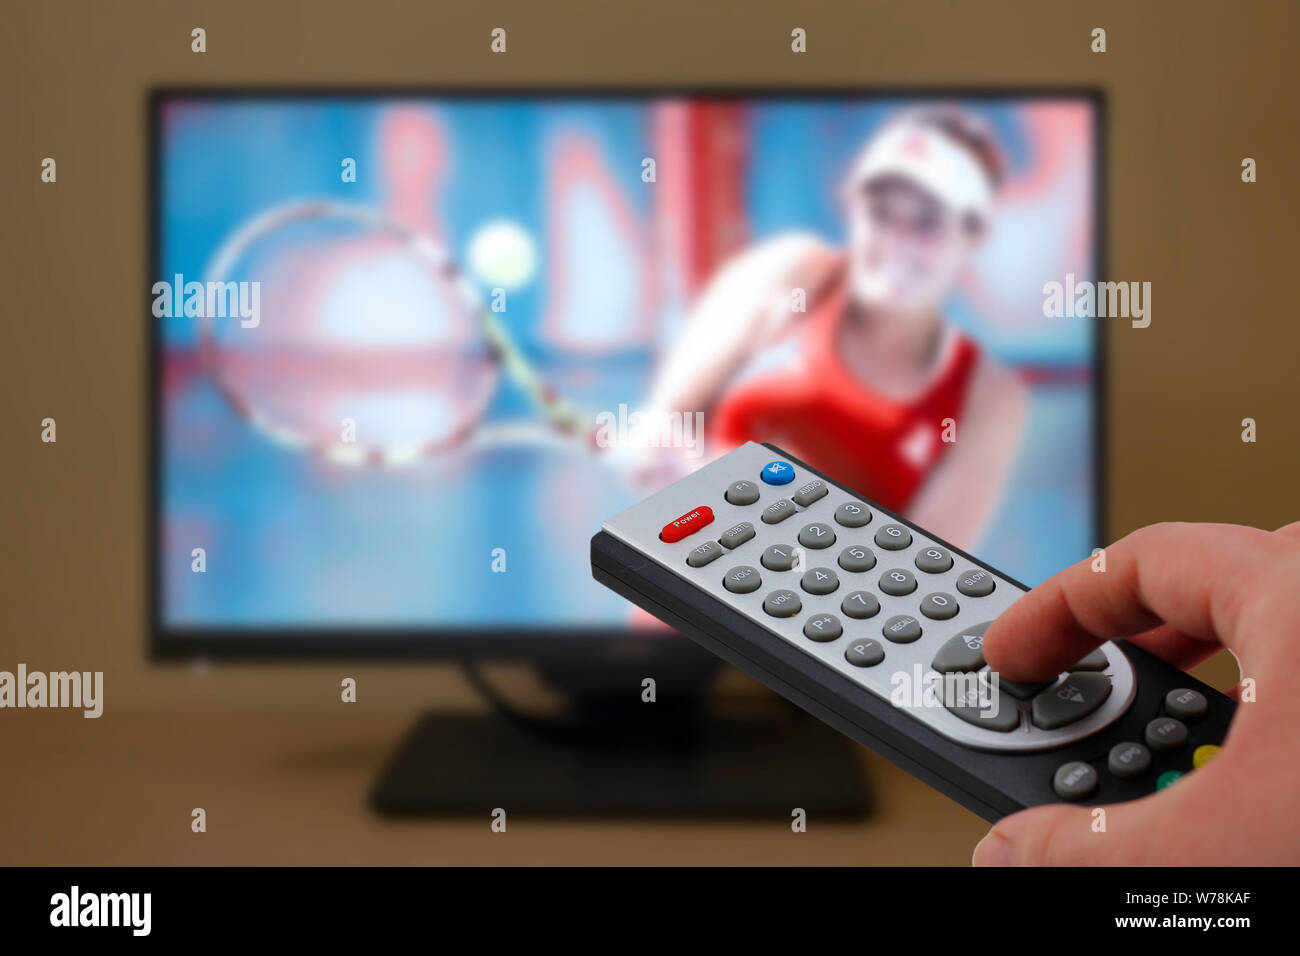 Watching a tennis match in the television, with a tv remote control in the hand Stock Photo